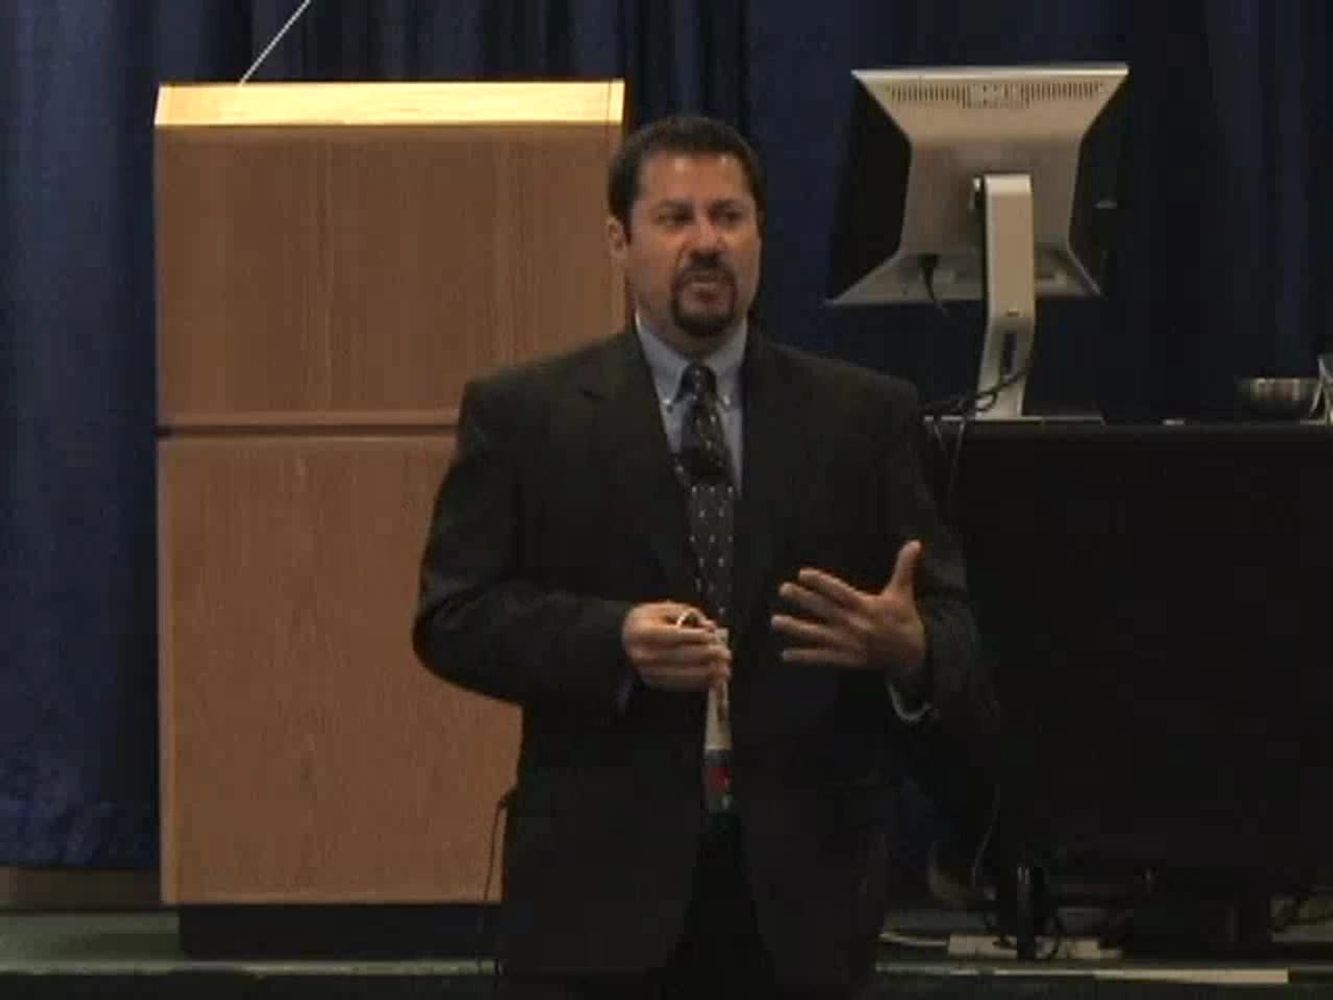 Doug lecturing on emergency management techniques for spine-injured athletes